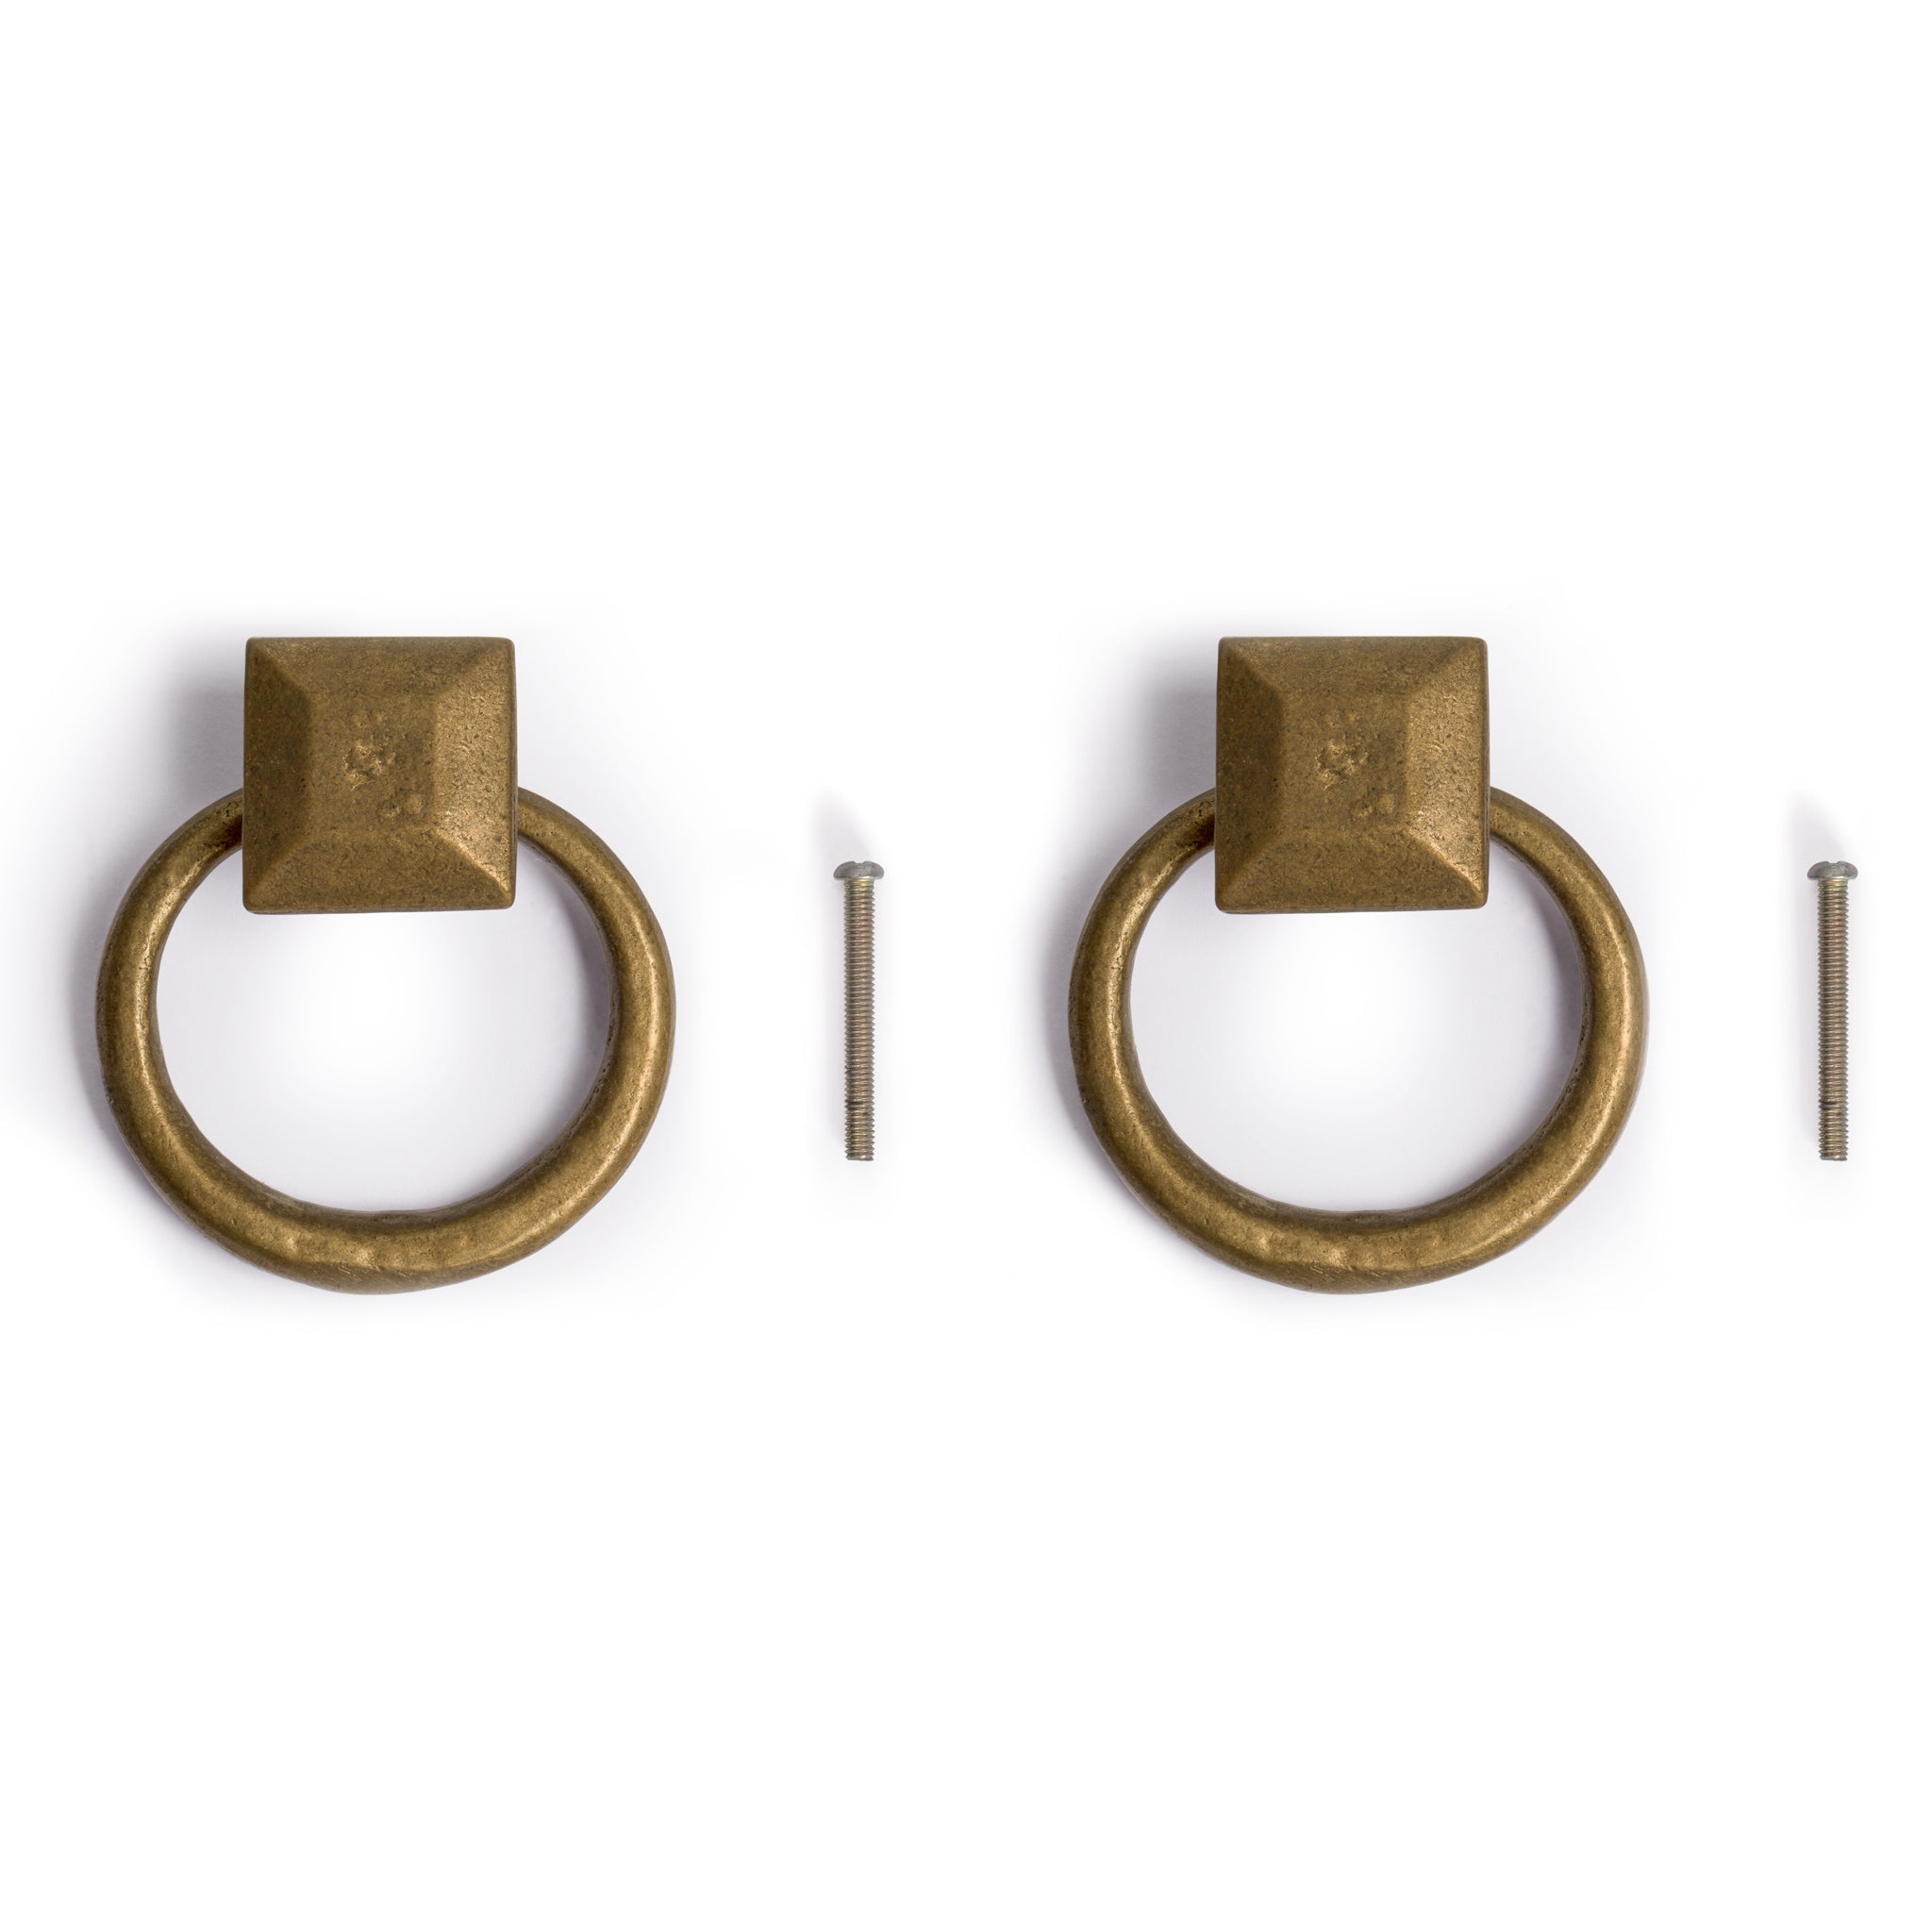 Peg and Ring Pulls 1.9" - Set of 2-Chinese Brass Hardware